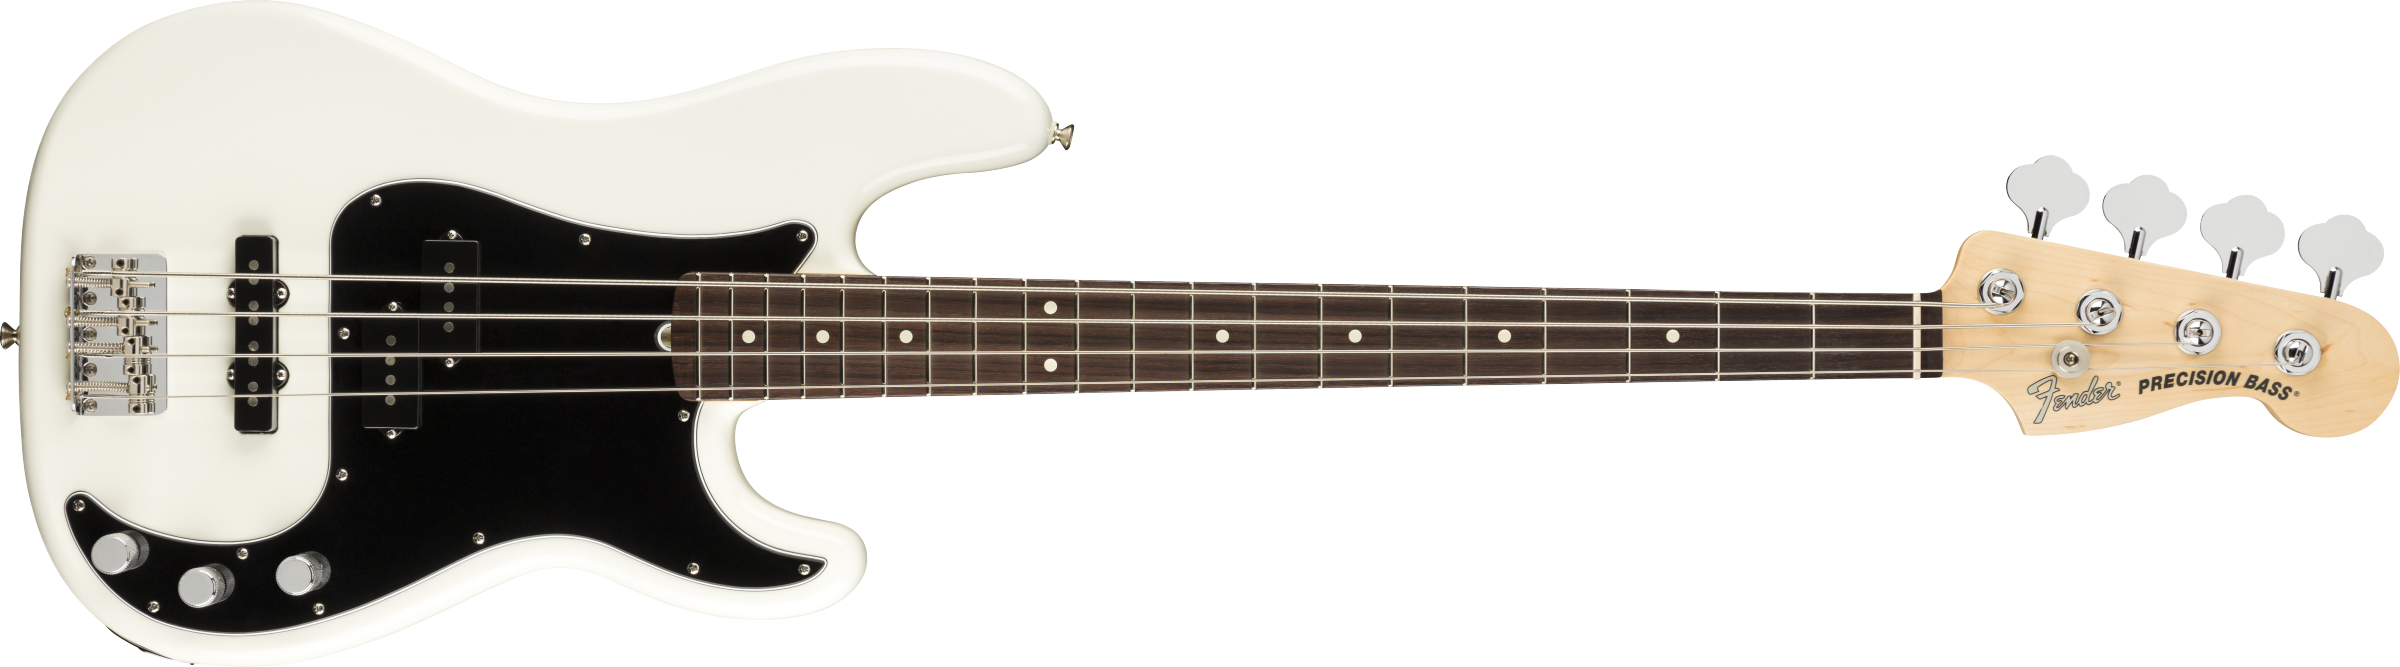 Fender® American Performer Precision Bass®, Rosewood Fingerboard, Arctic White